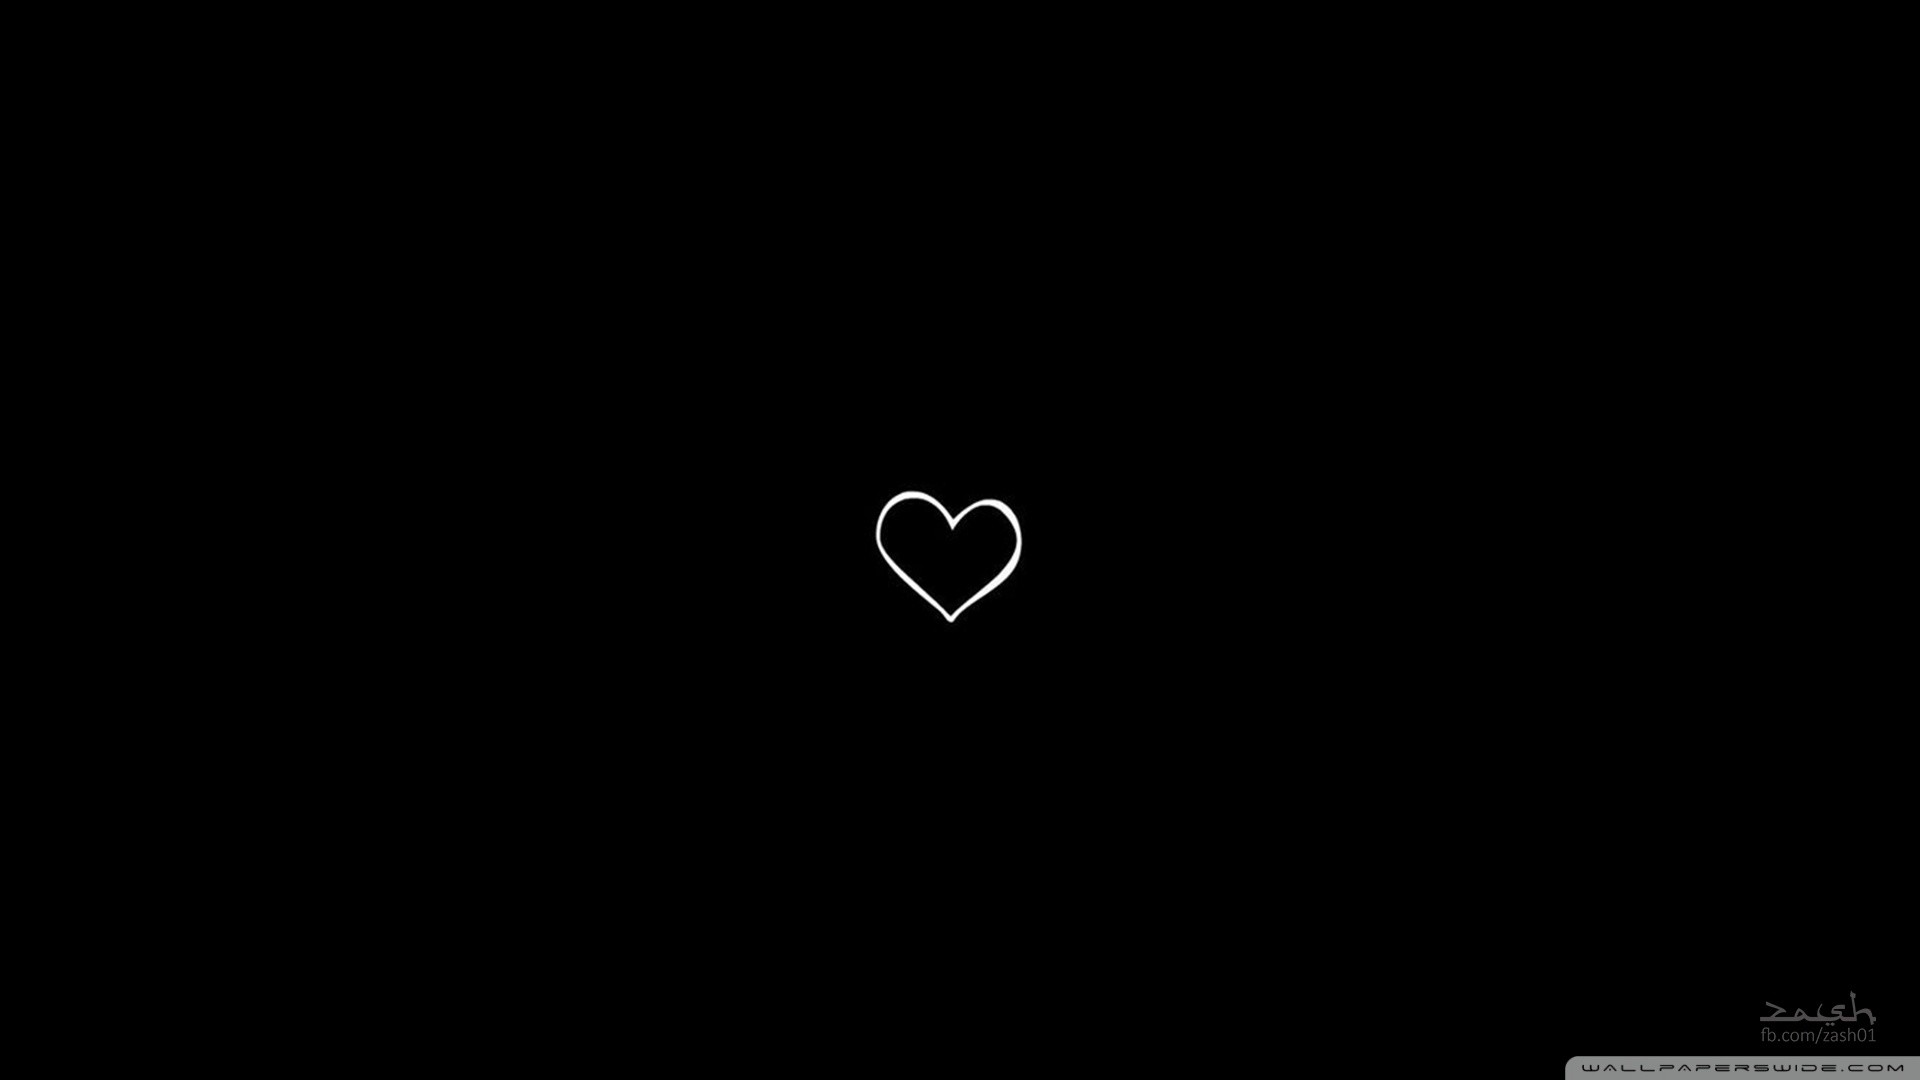 Black and White Heart Wallpaper (55+ images)